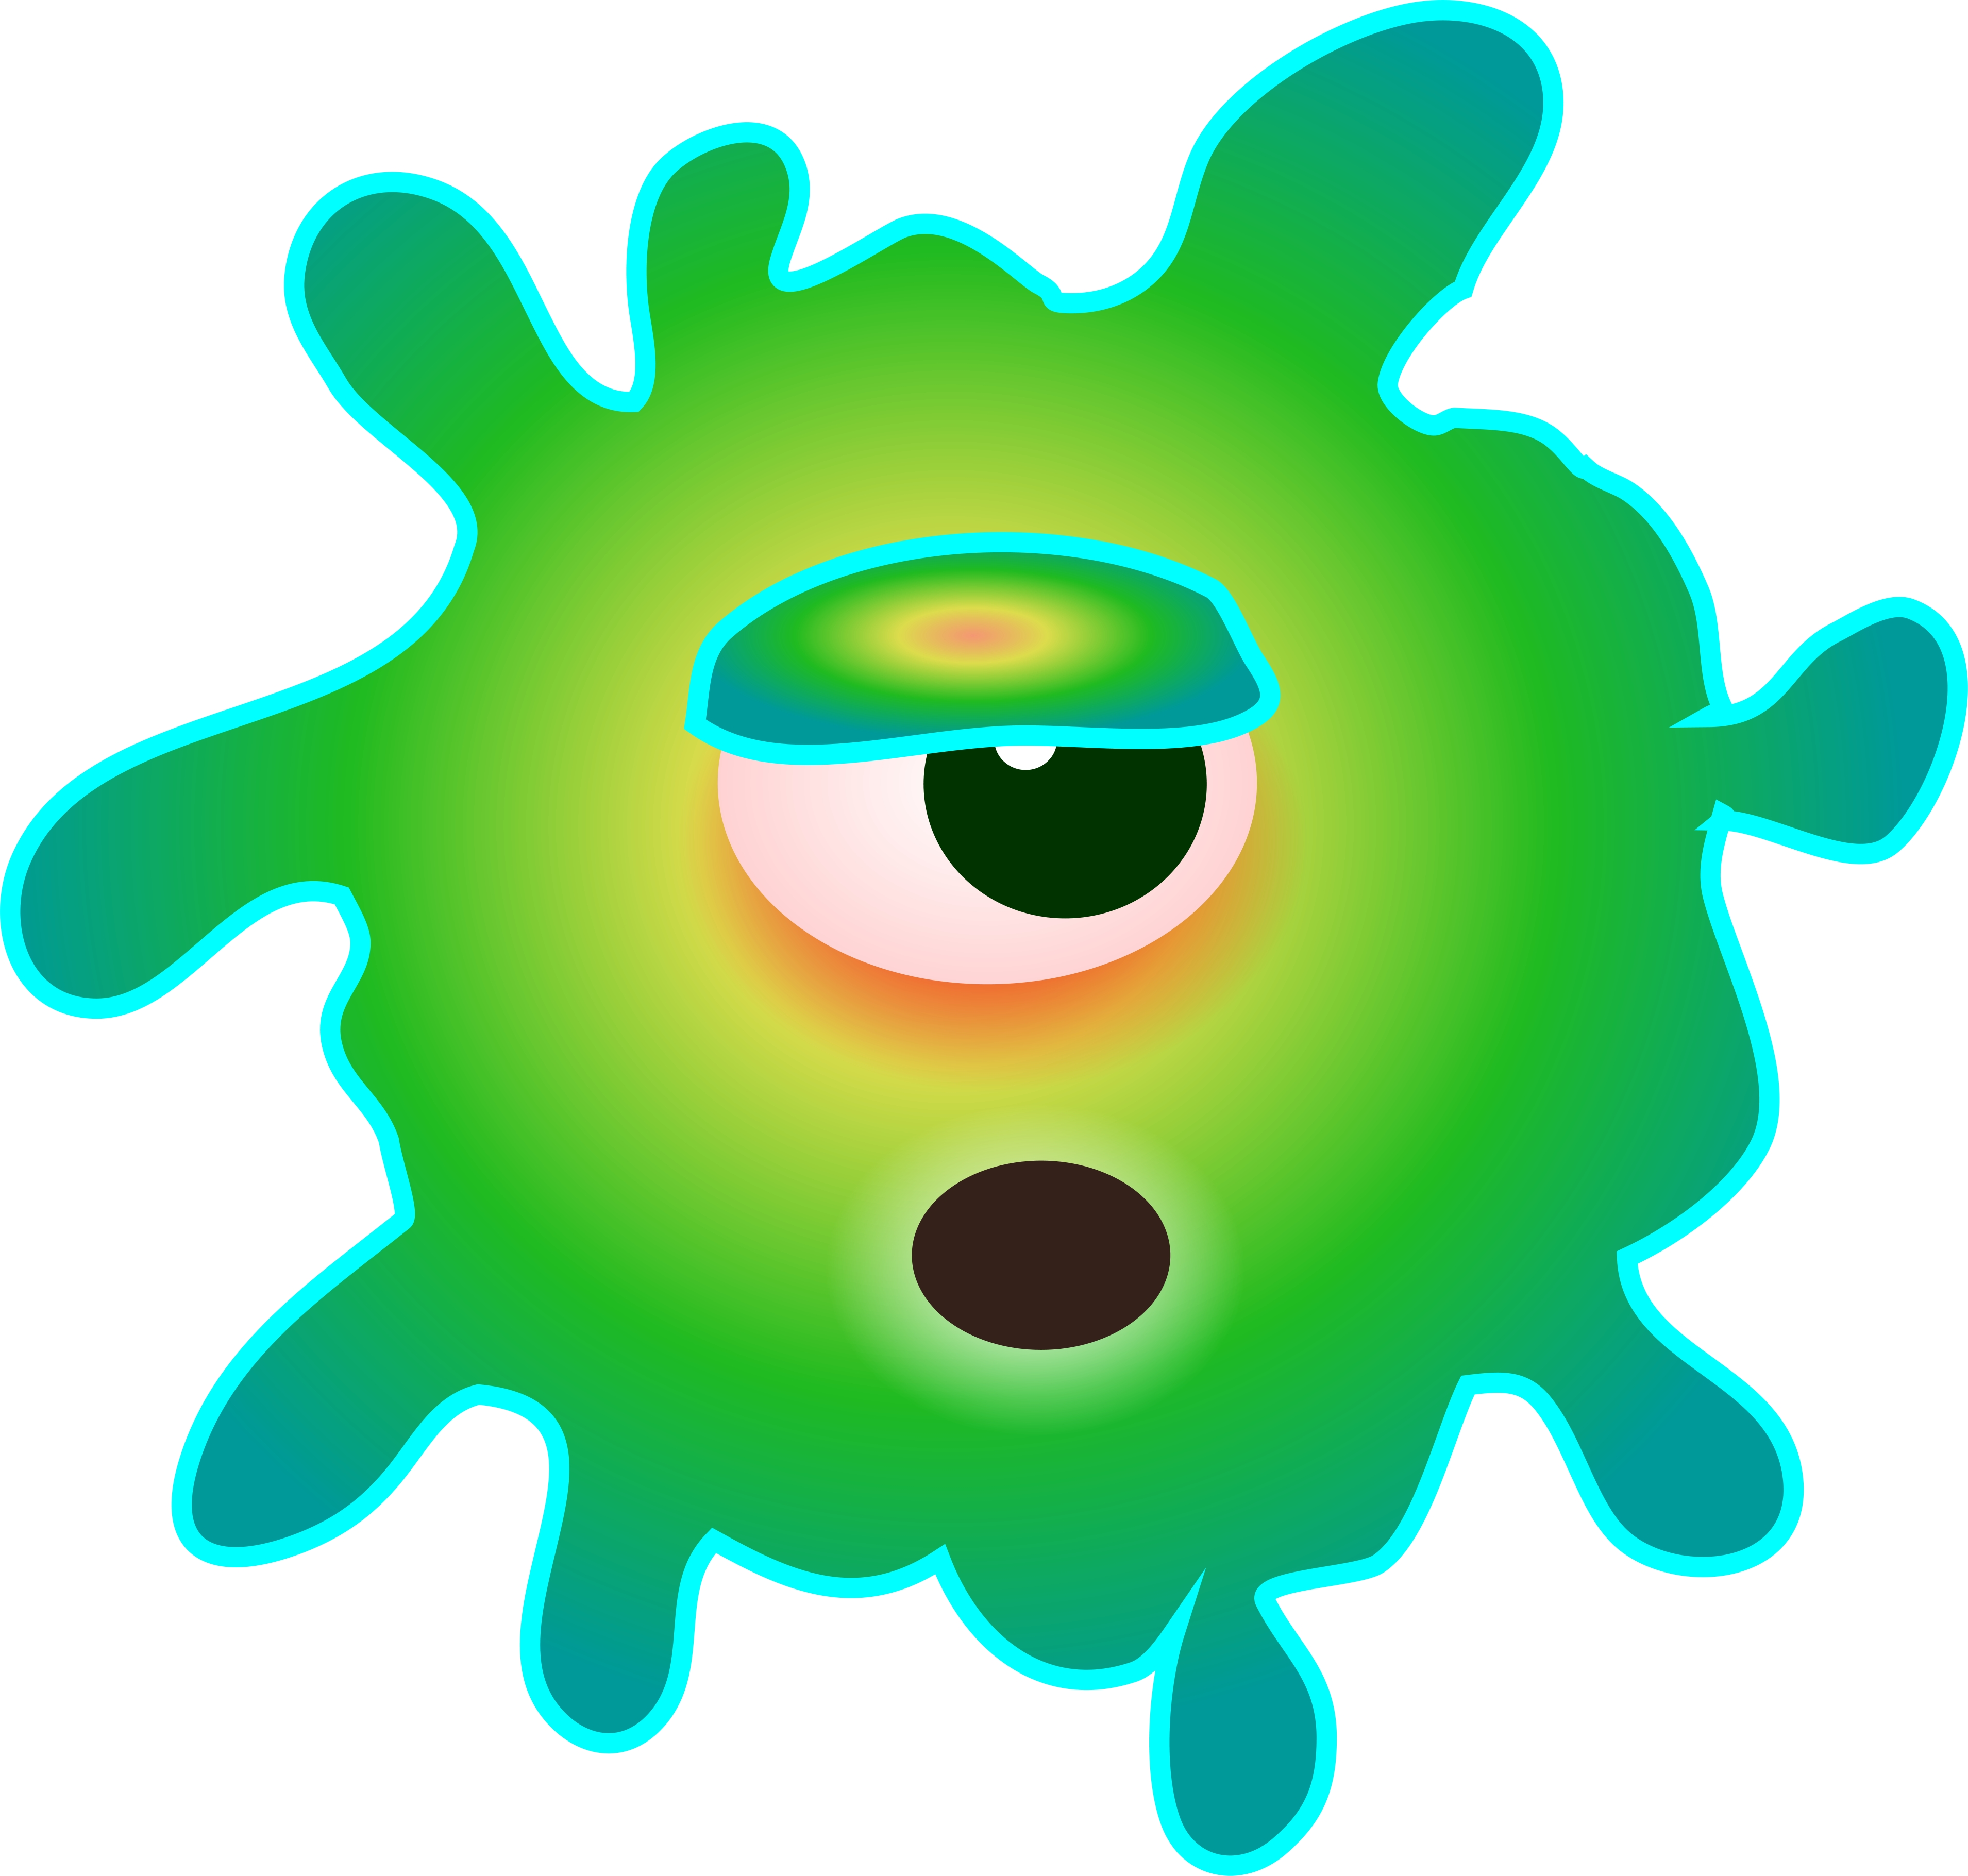 Germs And Bacteria Clipart Germ Virus Image   Vector Clip